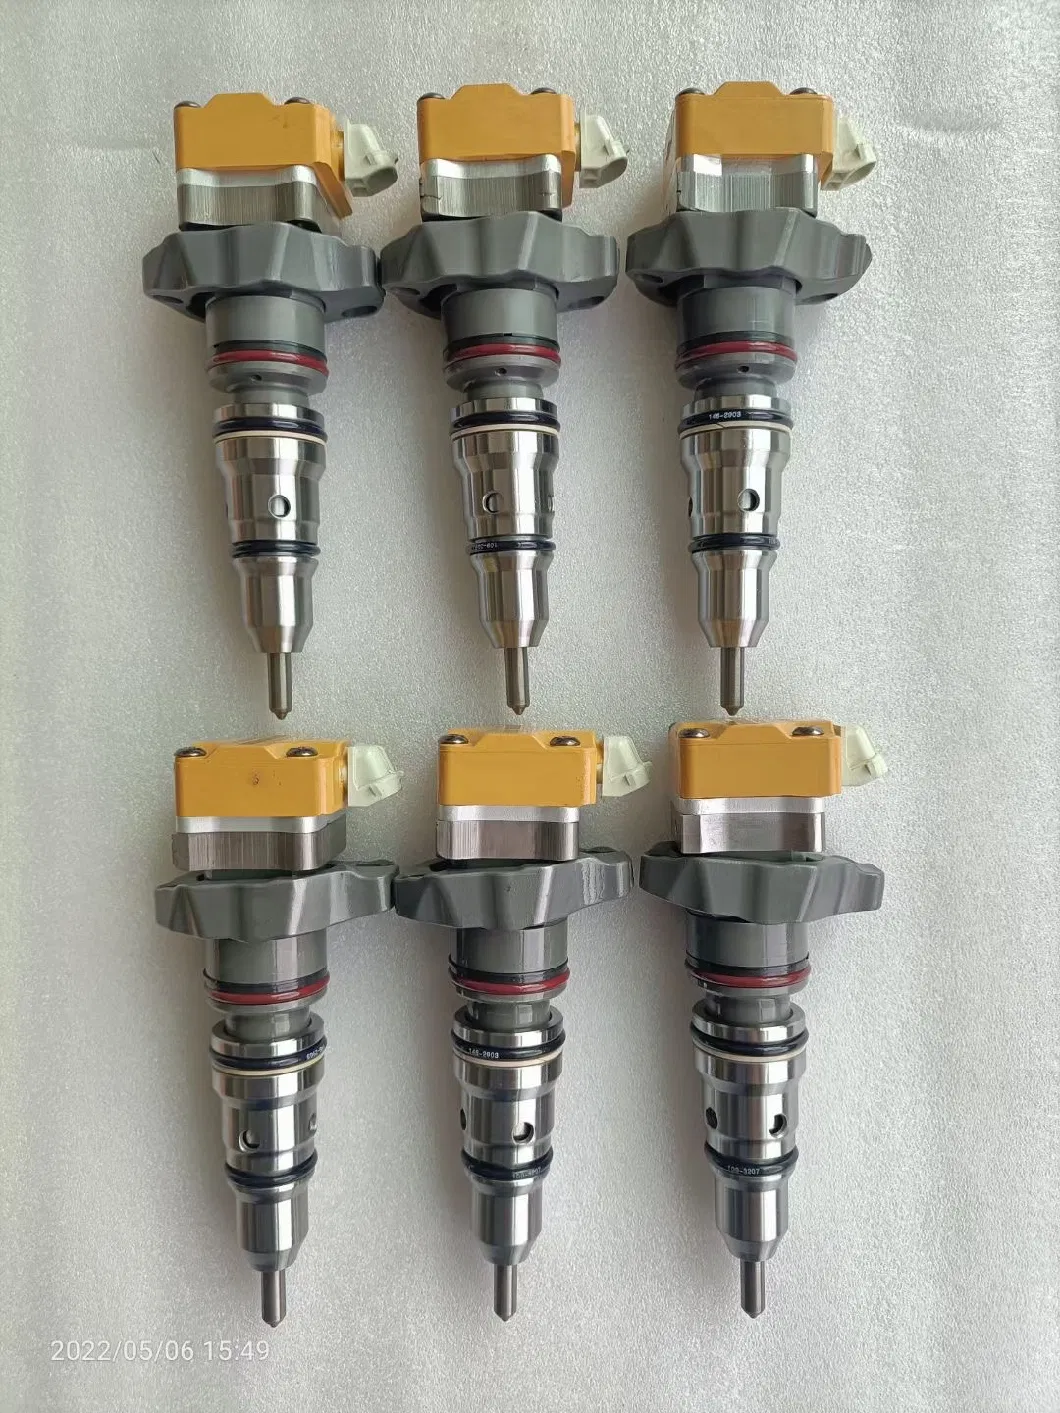 Diesel Common Rail Fuel Injector Bebe4d18002 Is Suitable for Volvo Penta MD13 Engine